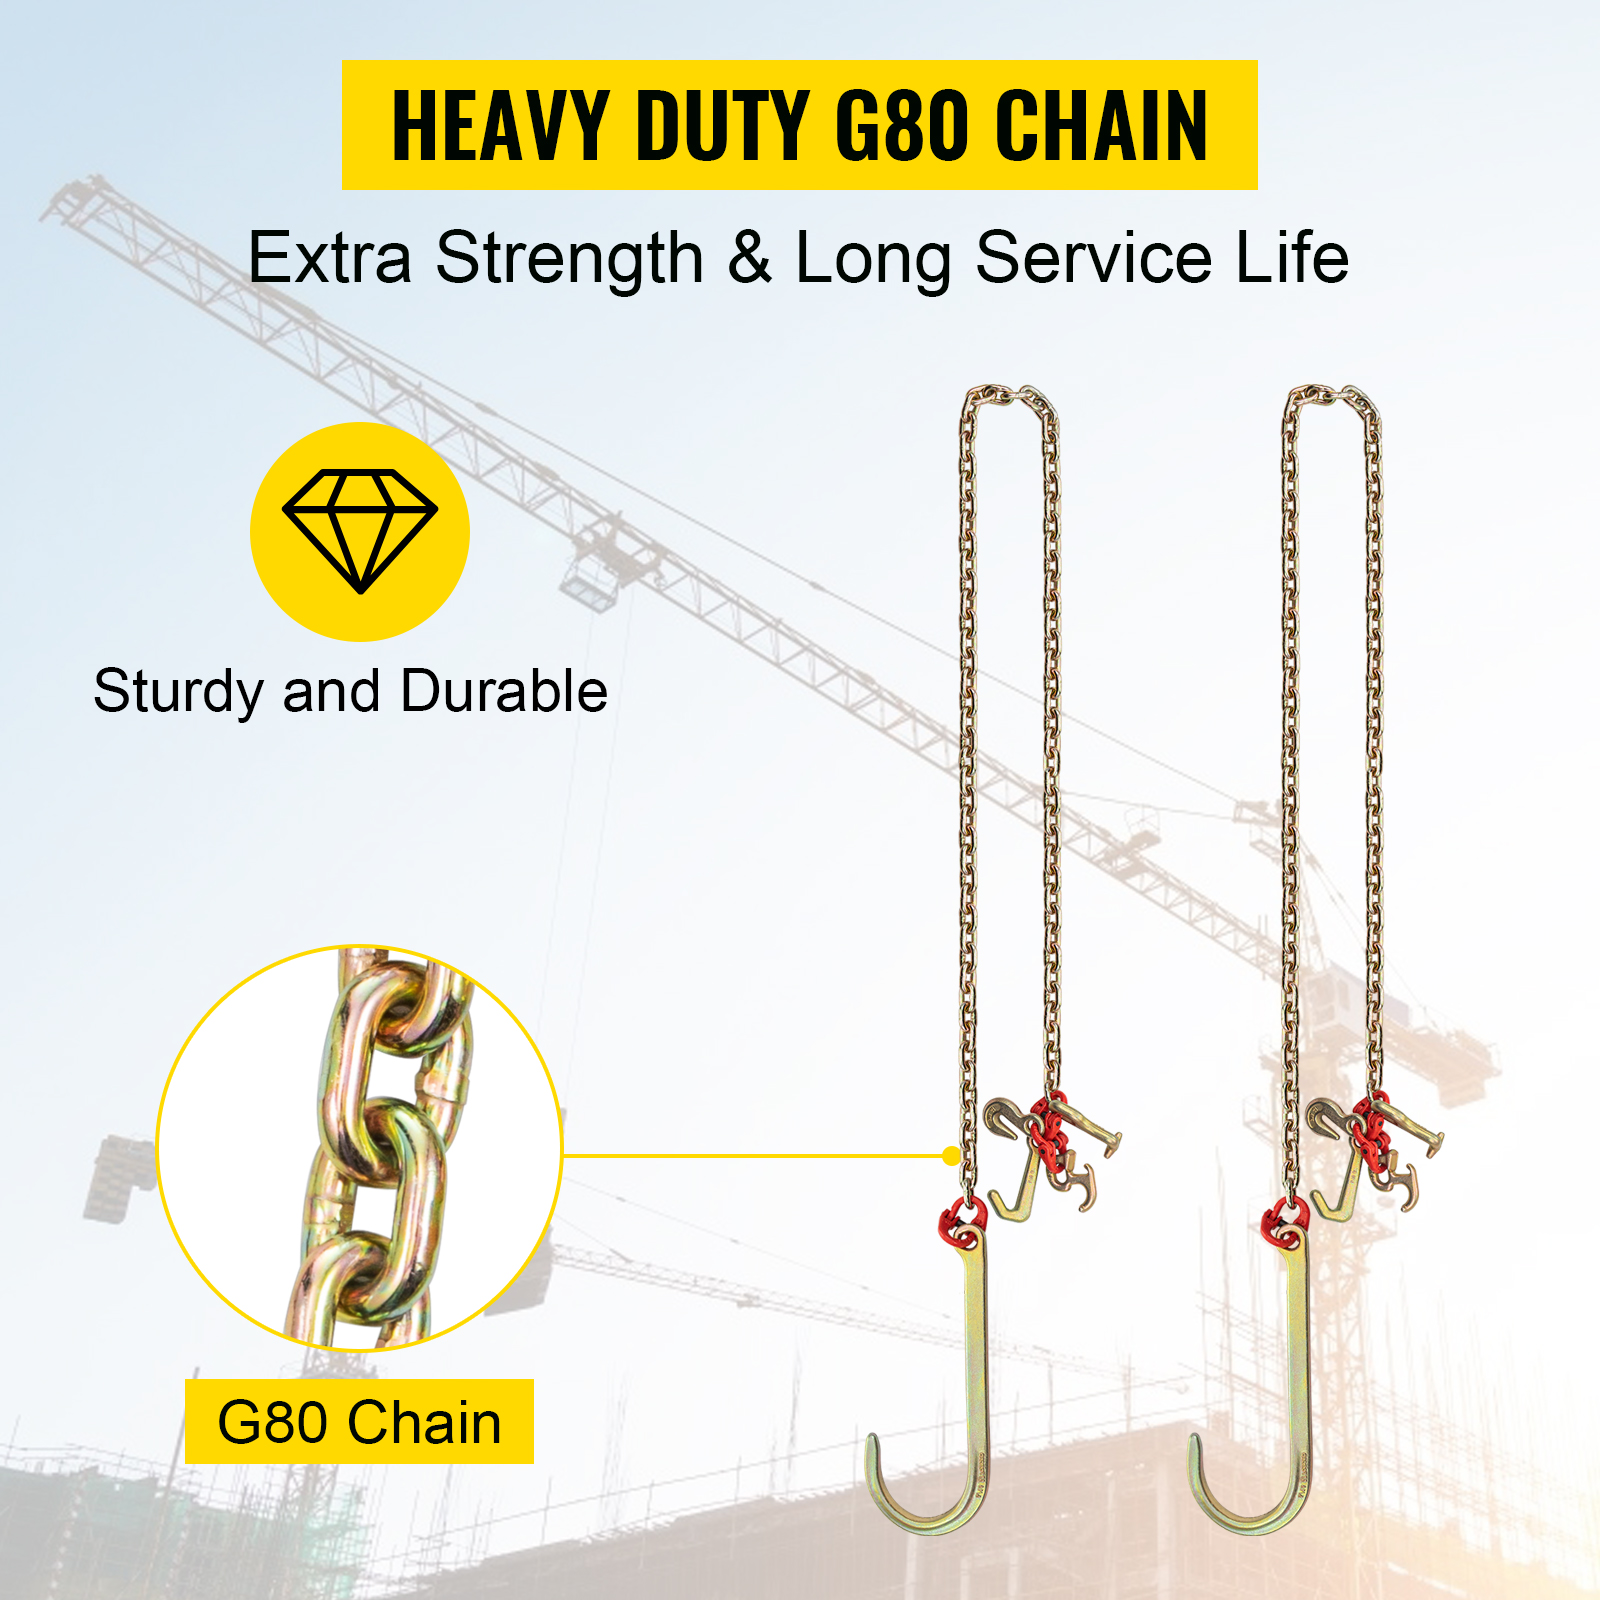 VEVOR Transport Binder Chain, 7100lbs Working Load Limit, 3/8''x20' G80 Tow  Chain Tie Down with Grab Hooks, DOT Certified, Galvanized Coating Manganese  Steel for Dock Factory Construction Site, 2 Pack